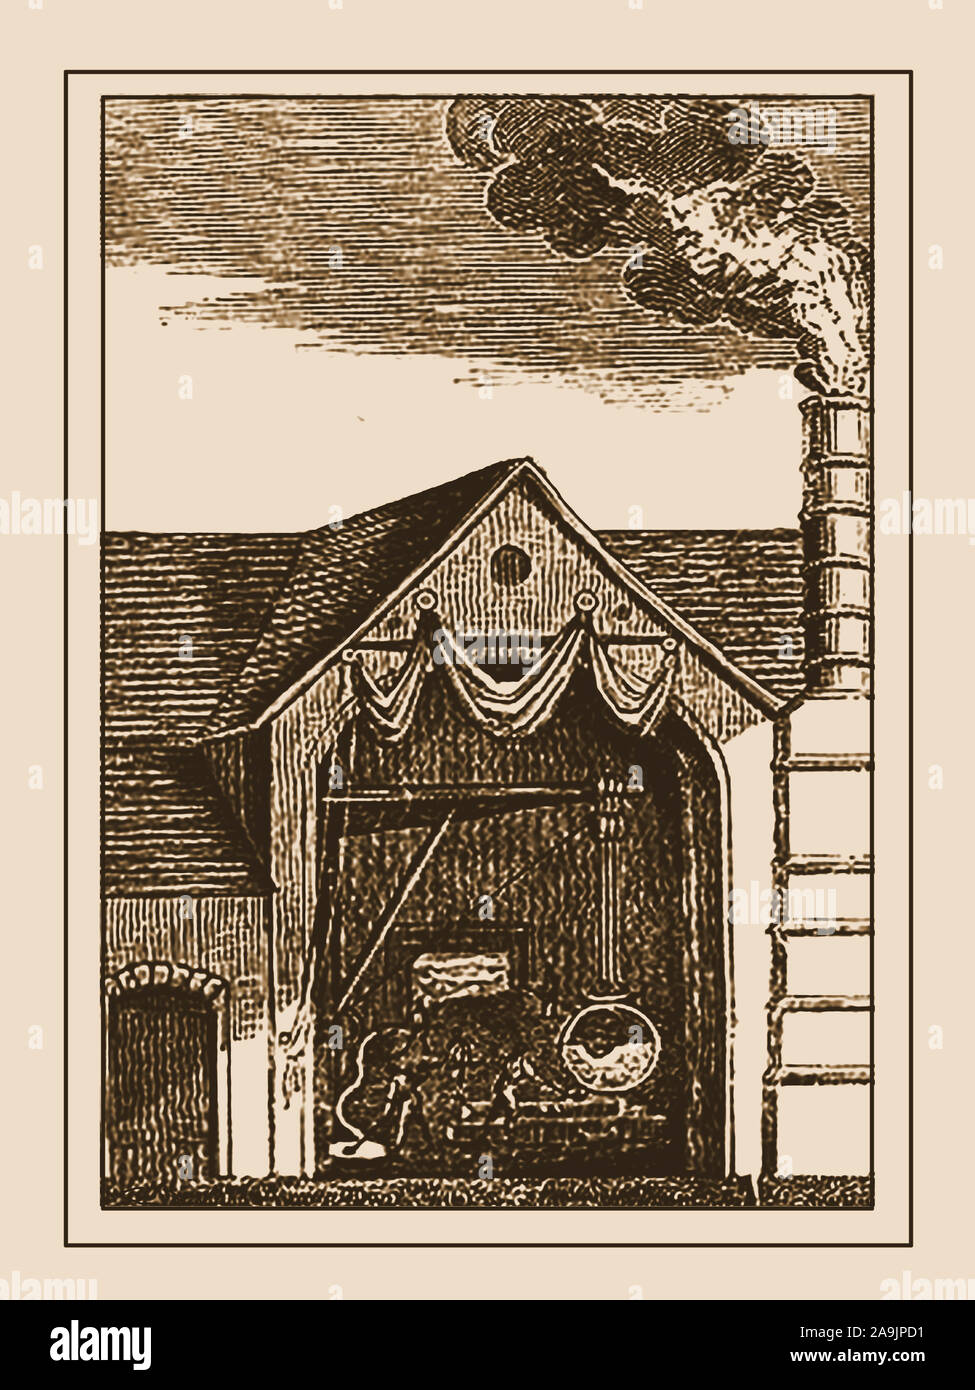 An early woodcut engraving of a British Iron foundry Stock Photo